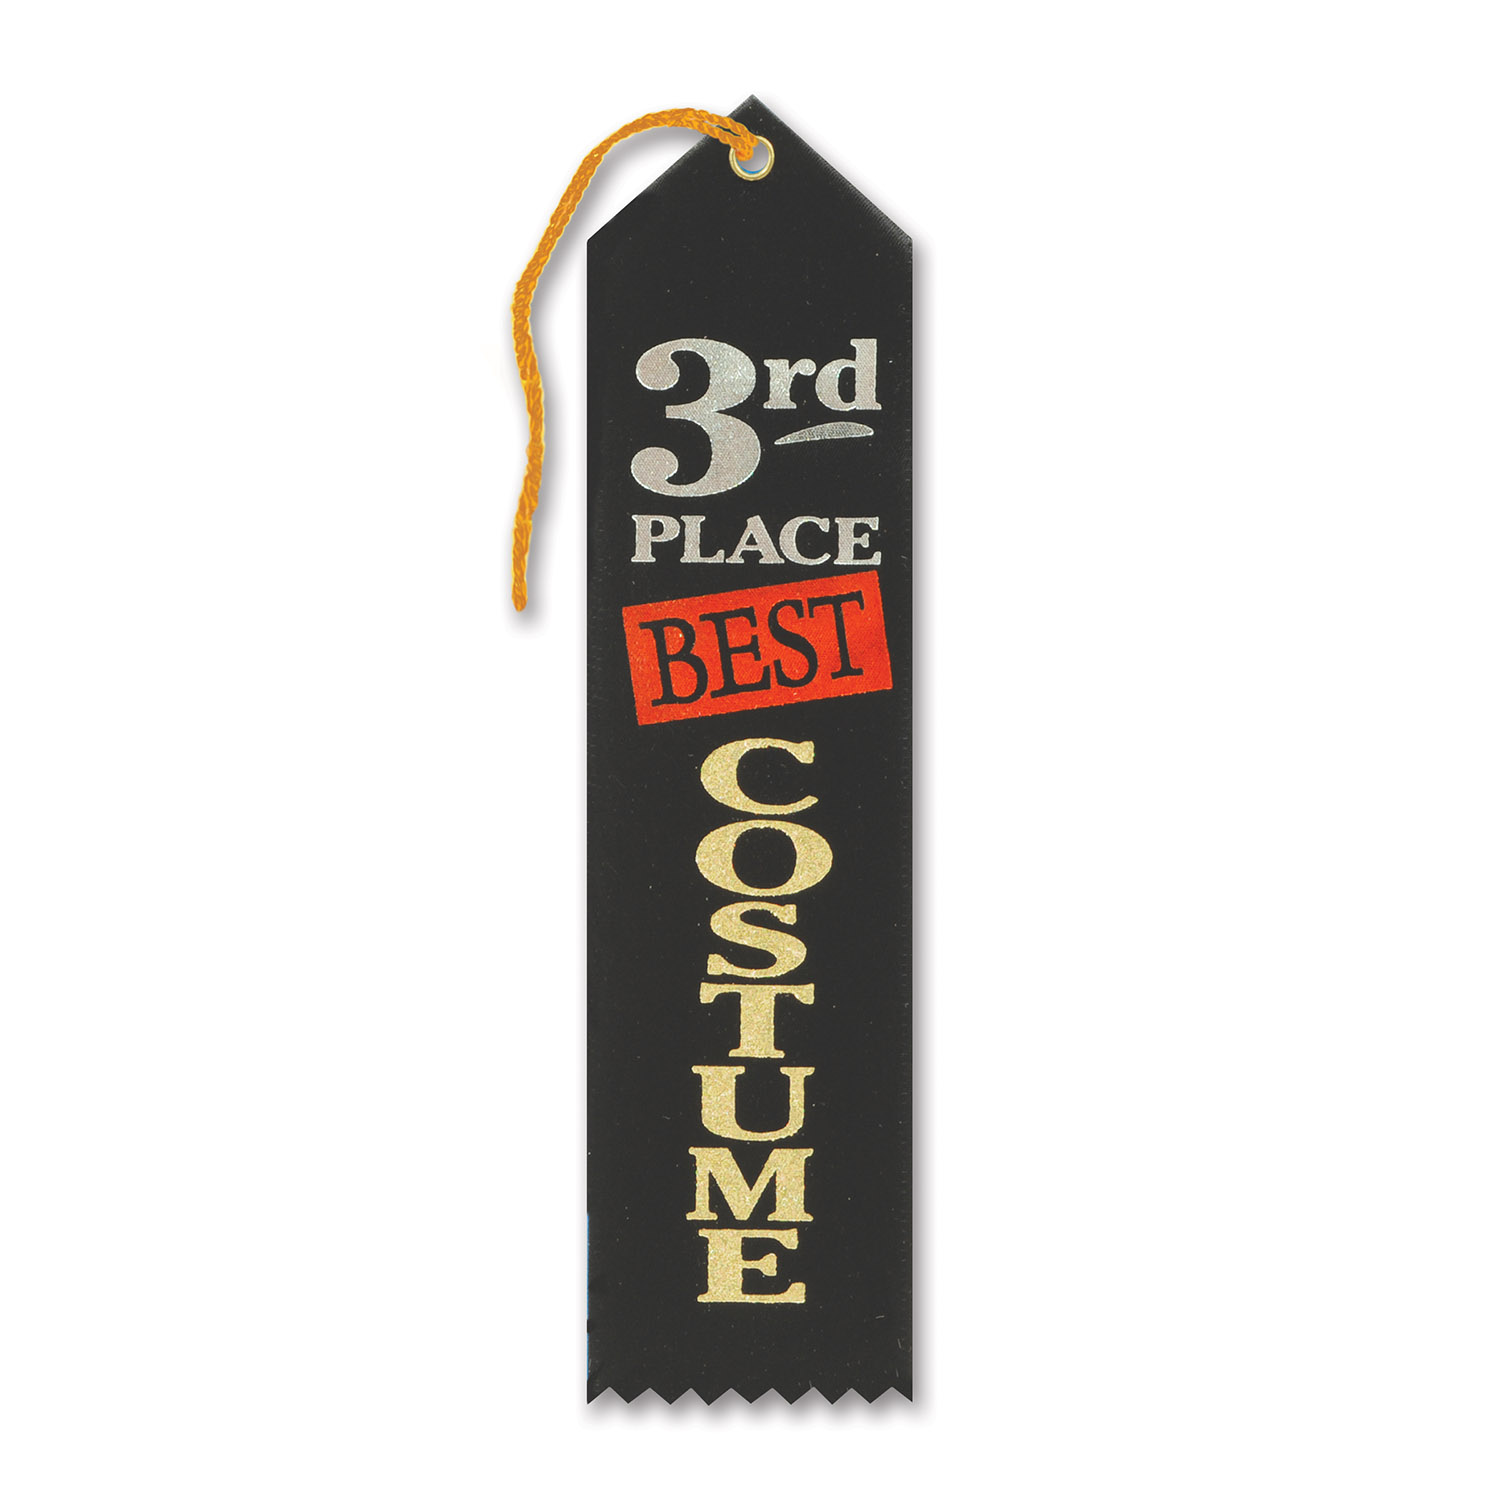 ''Best COSTUME ''''''''''''''''3rd'''''''''''''''' Place Award Ribbon''''''''''